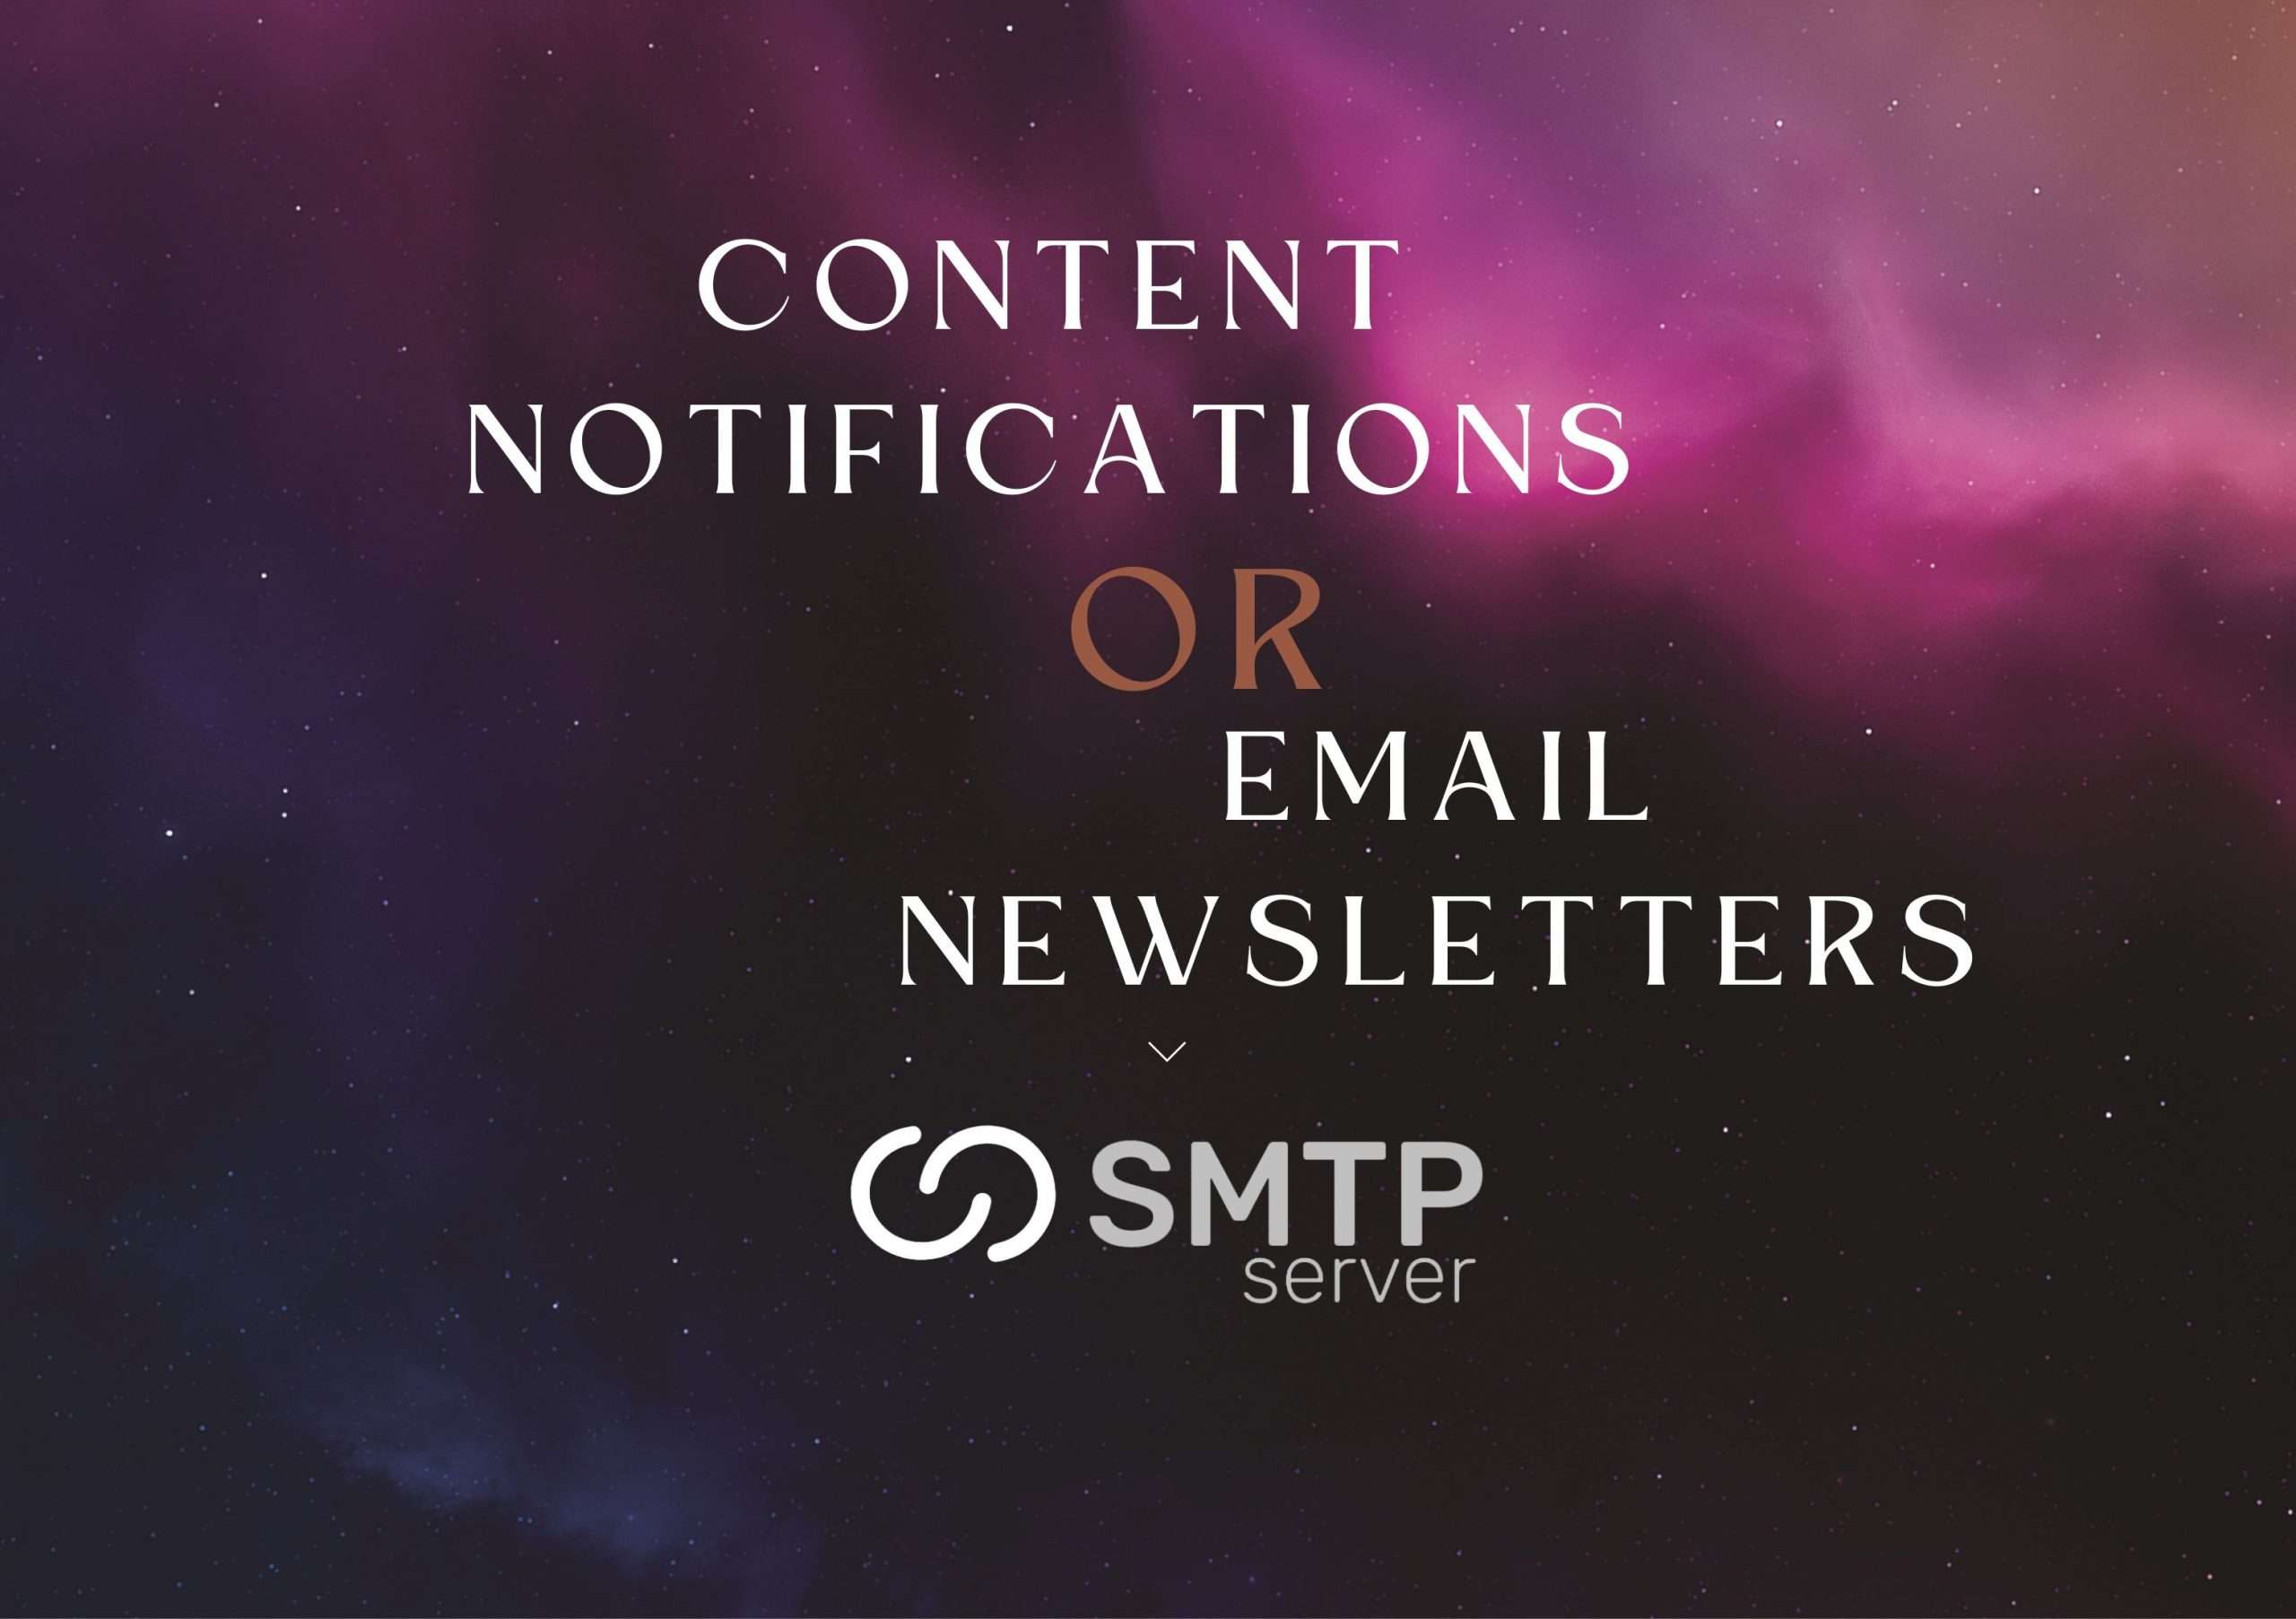 Content Notifications or Email Newsletters for Getting the Word Out